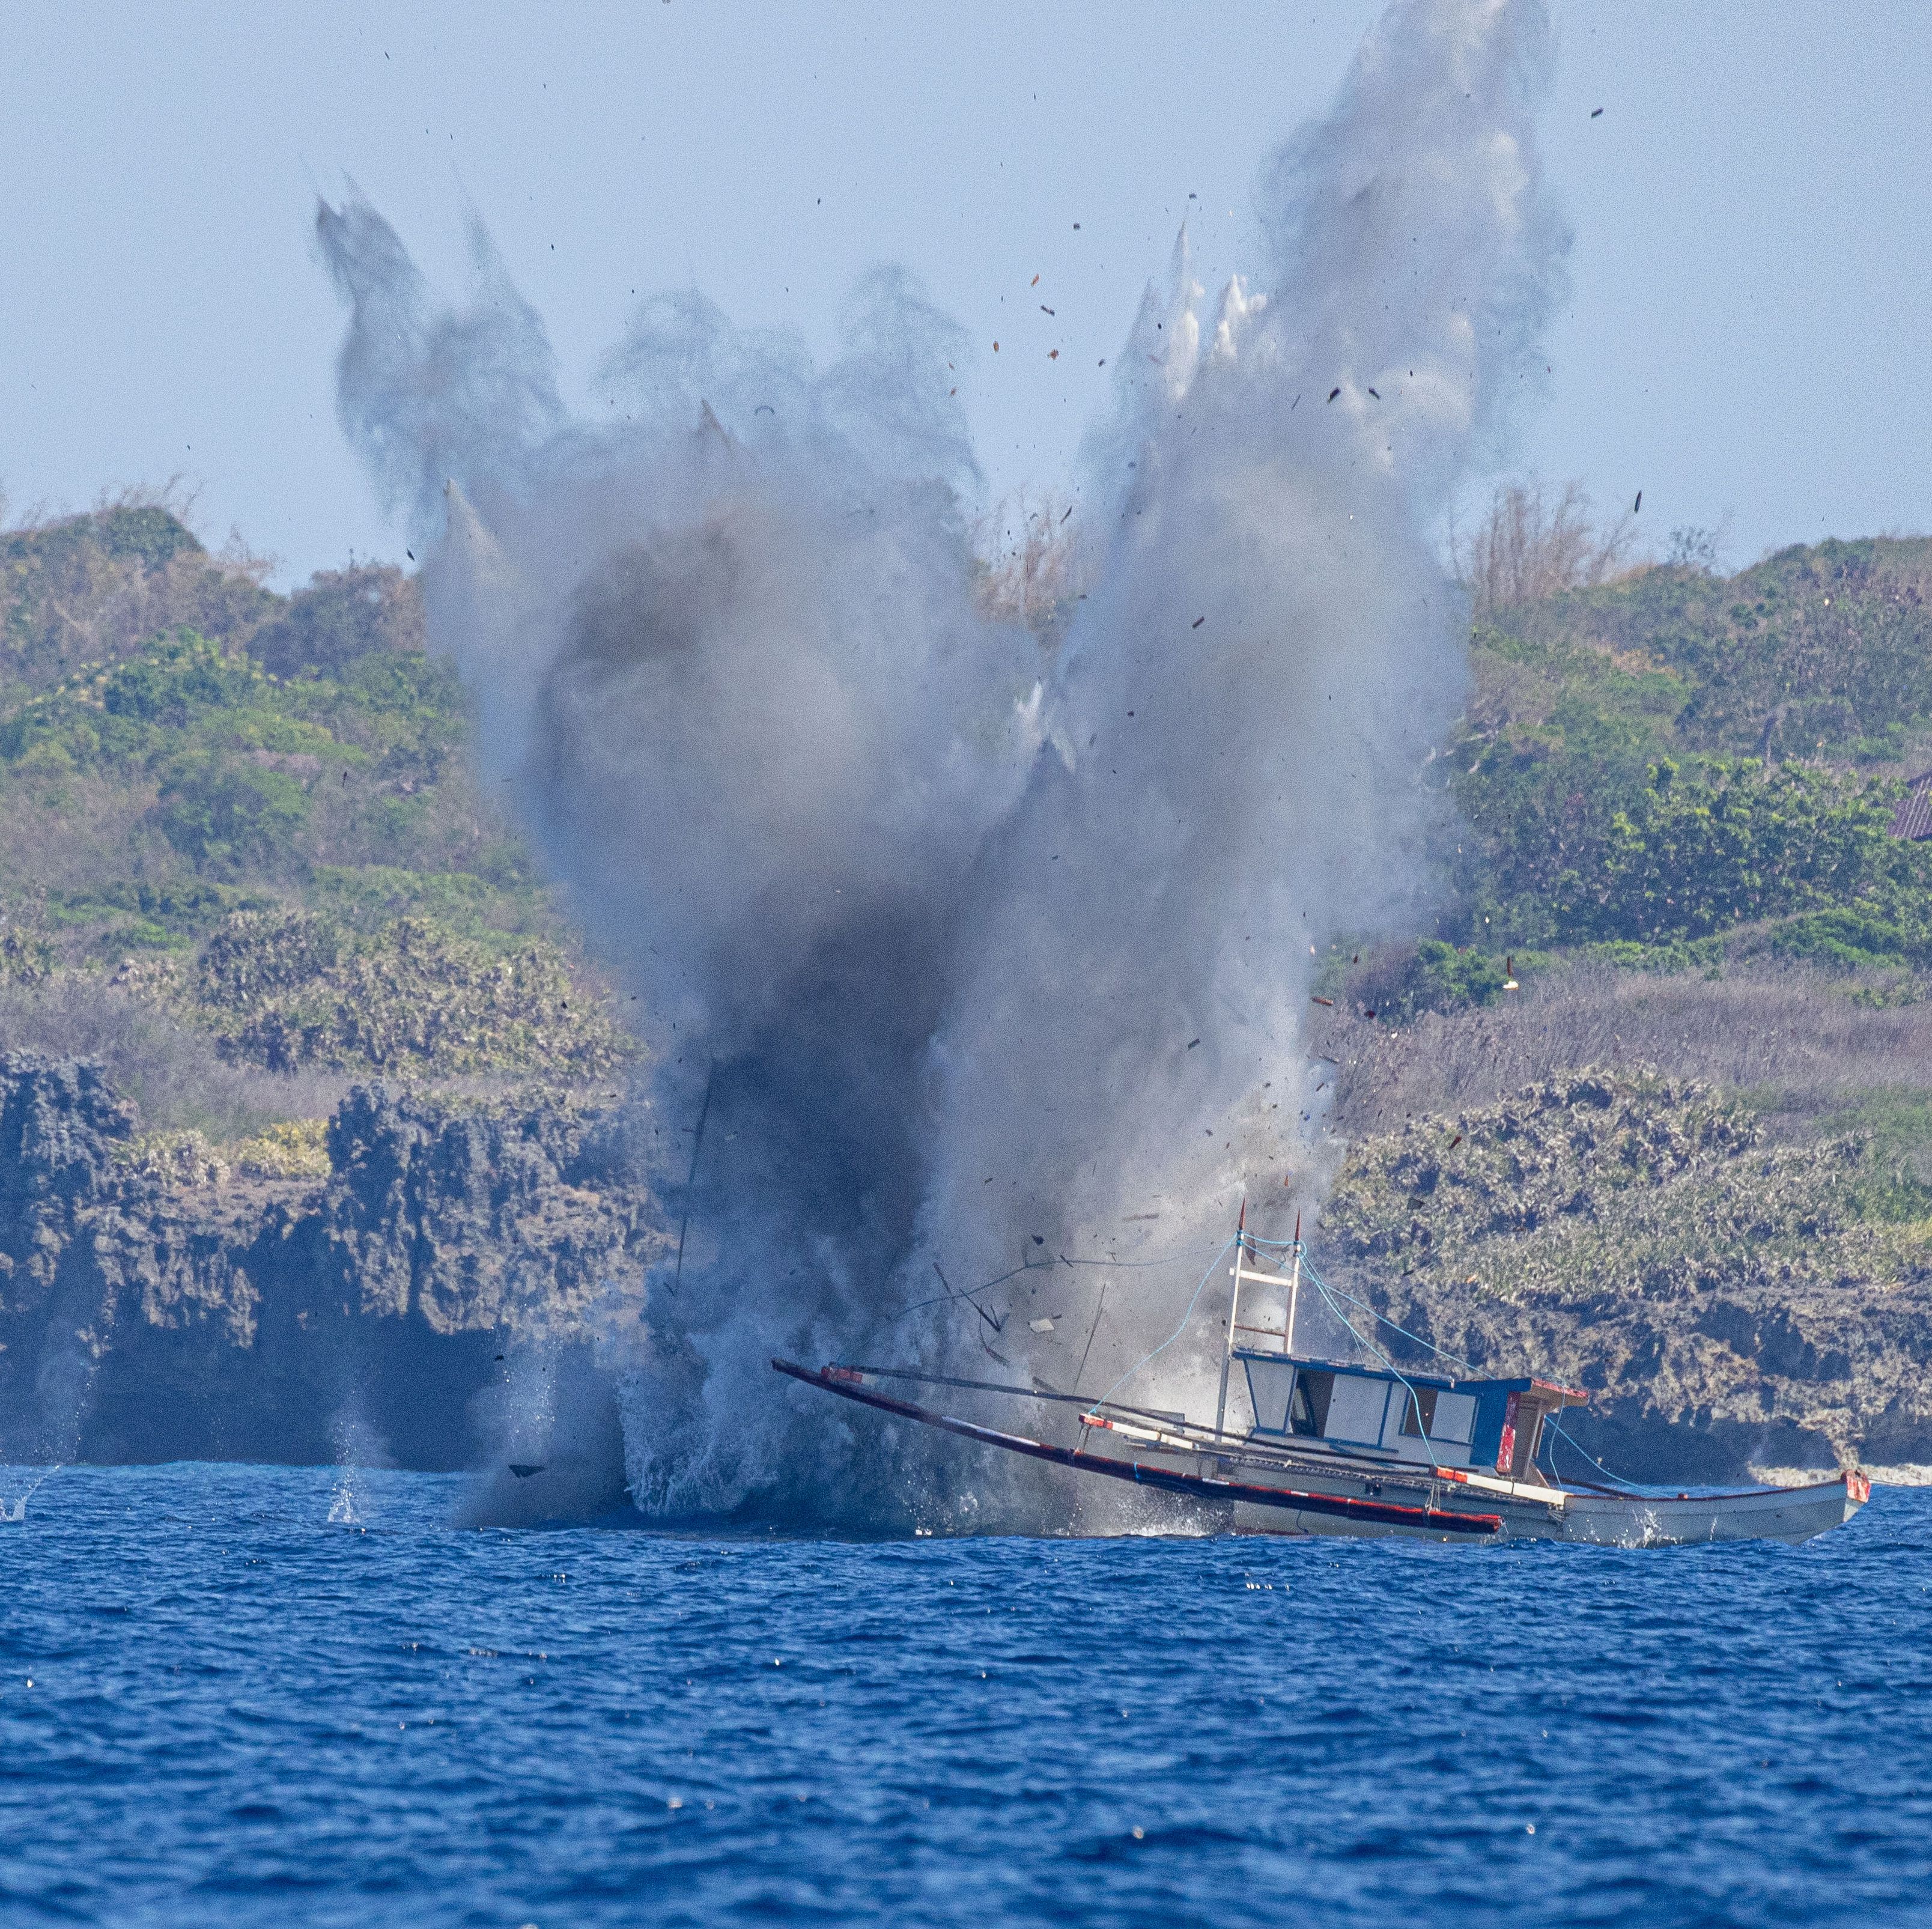 A U.S. Gunship Sank a Fishing Vessel in the Pacific. The Target Was No Ordinary Boat.